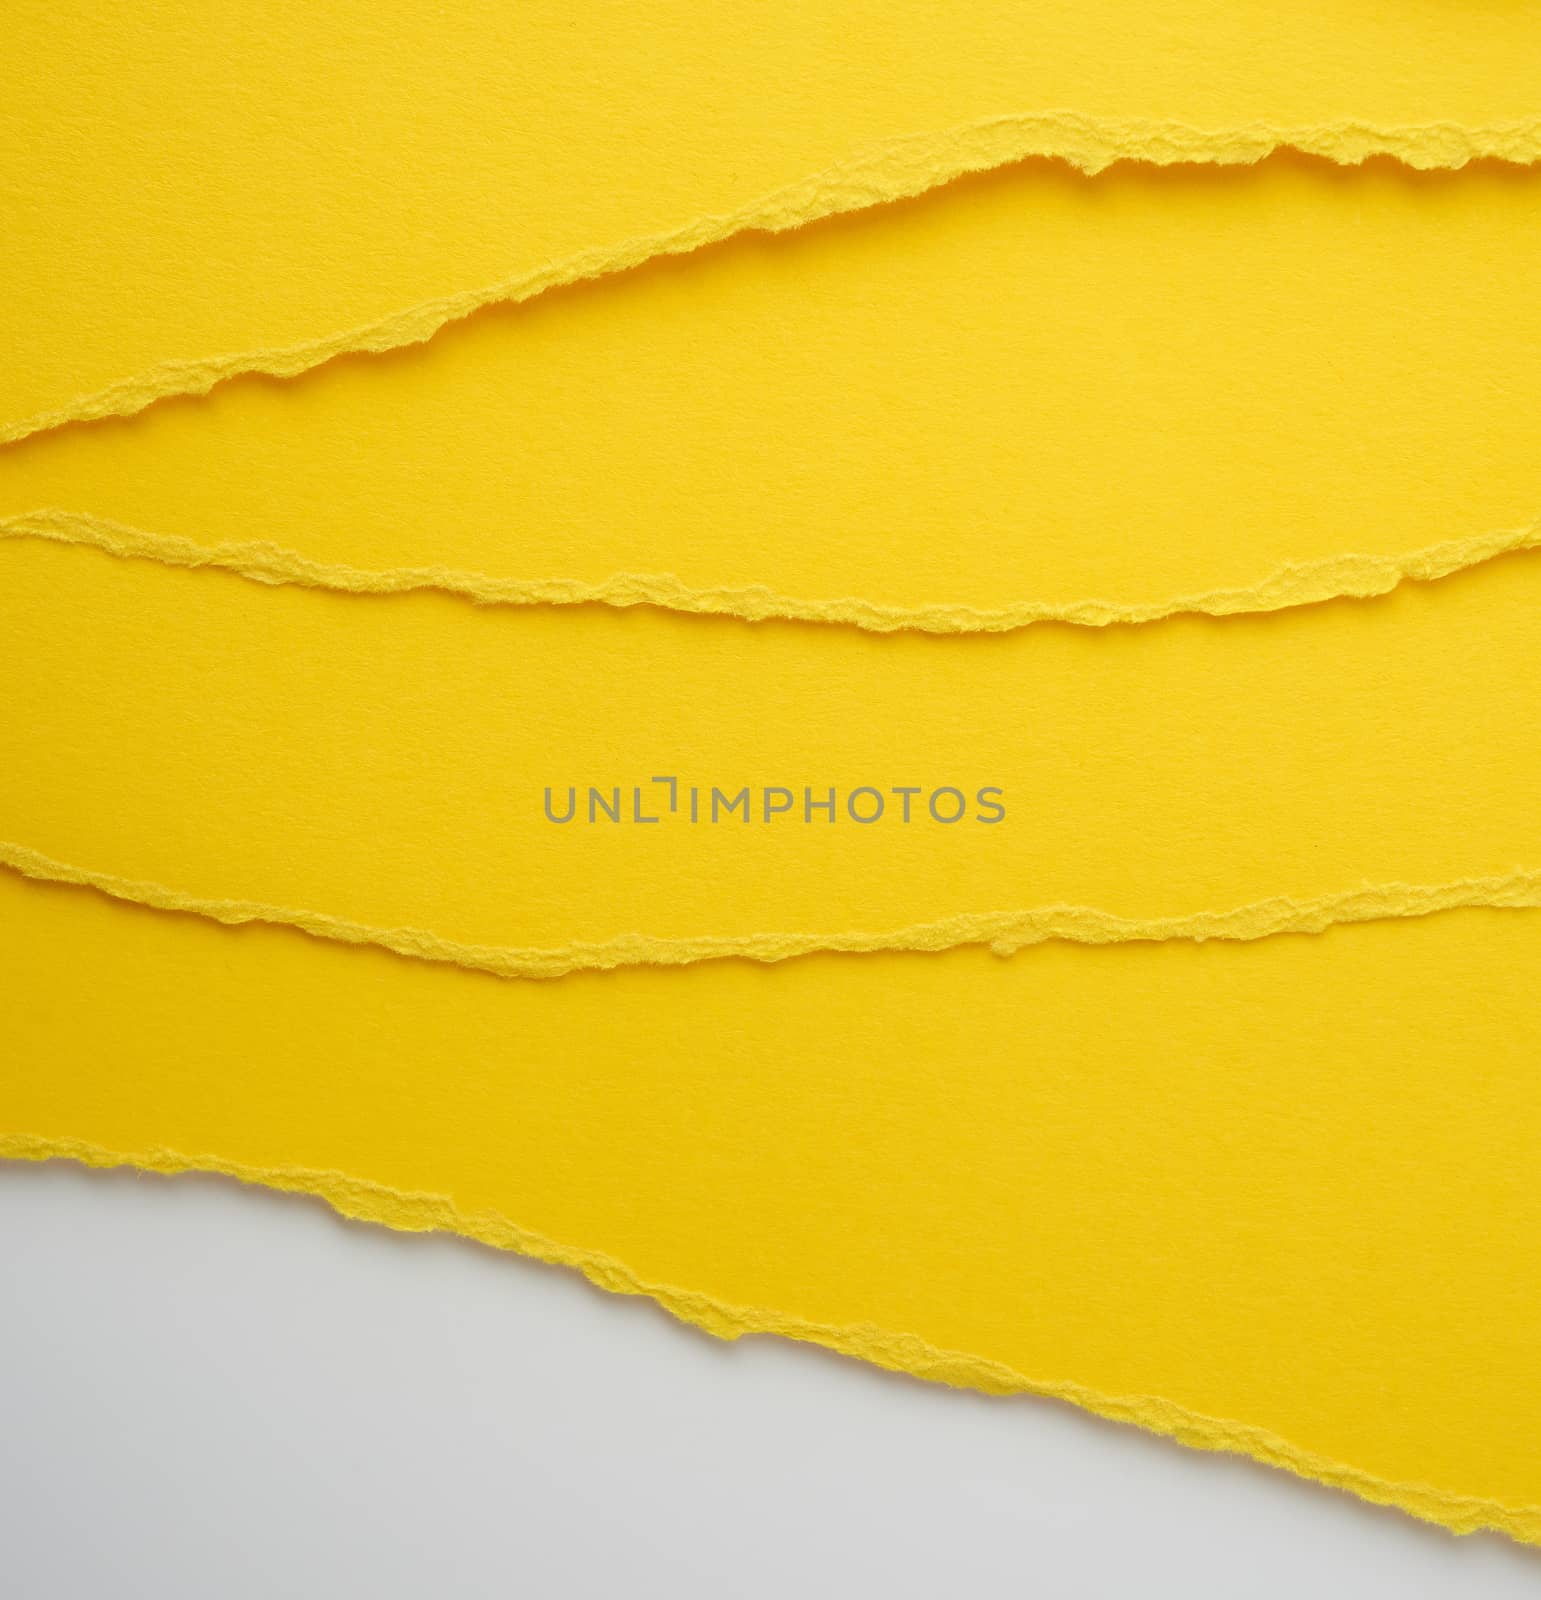 background of layered yellow torn paper with a shadow, backdrop  by ndanko